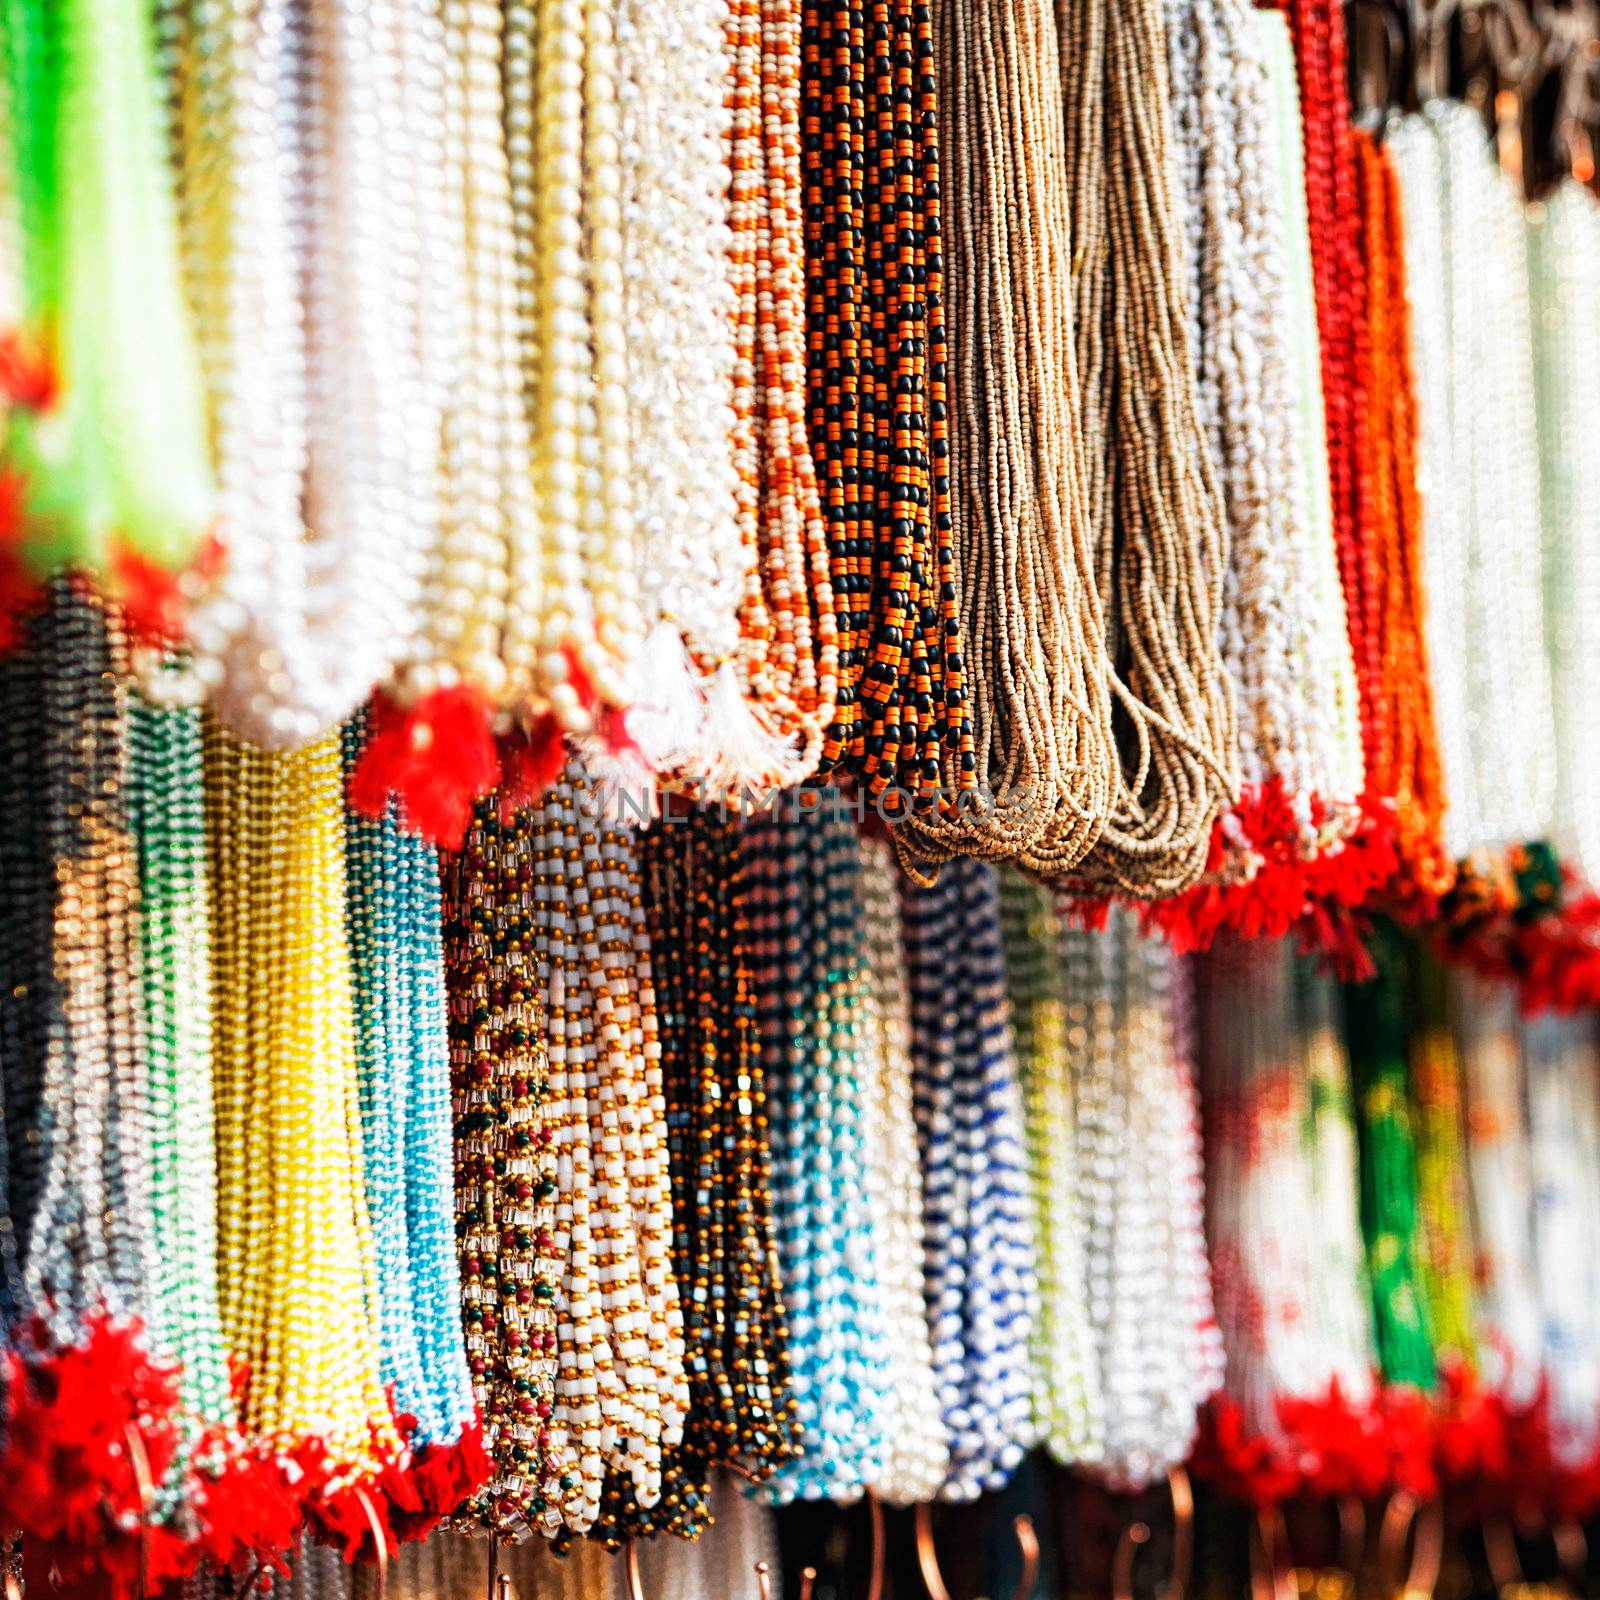 Indian beads in local market in Pushkar. Rajasthan, India, Asia